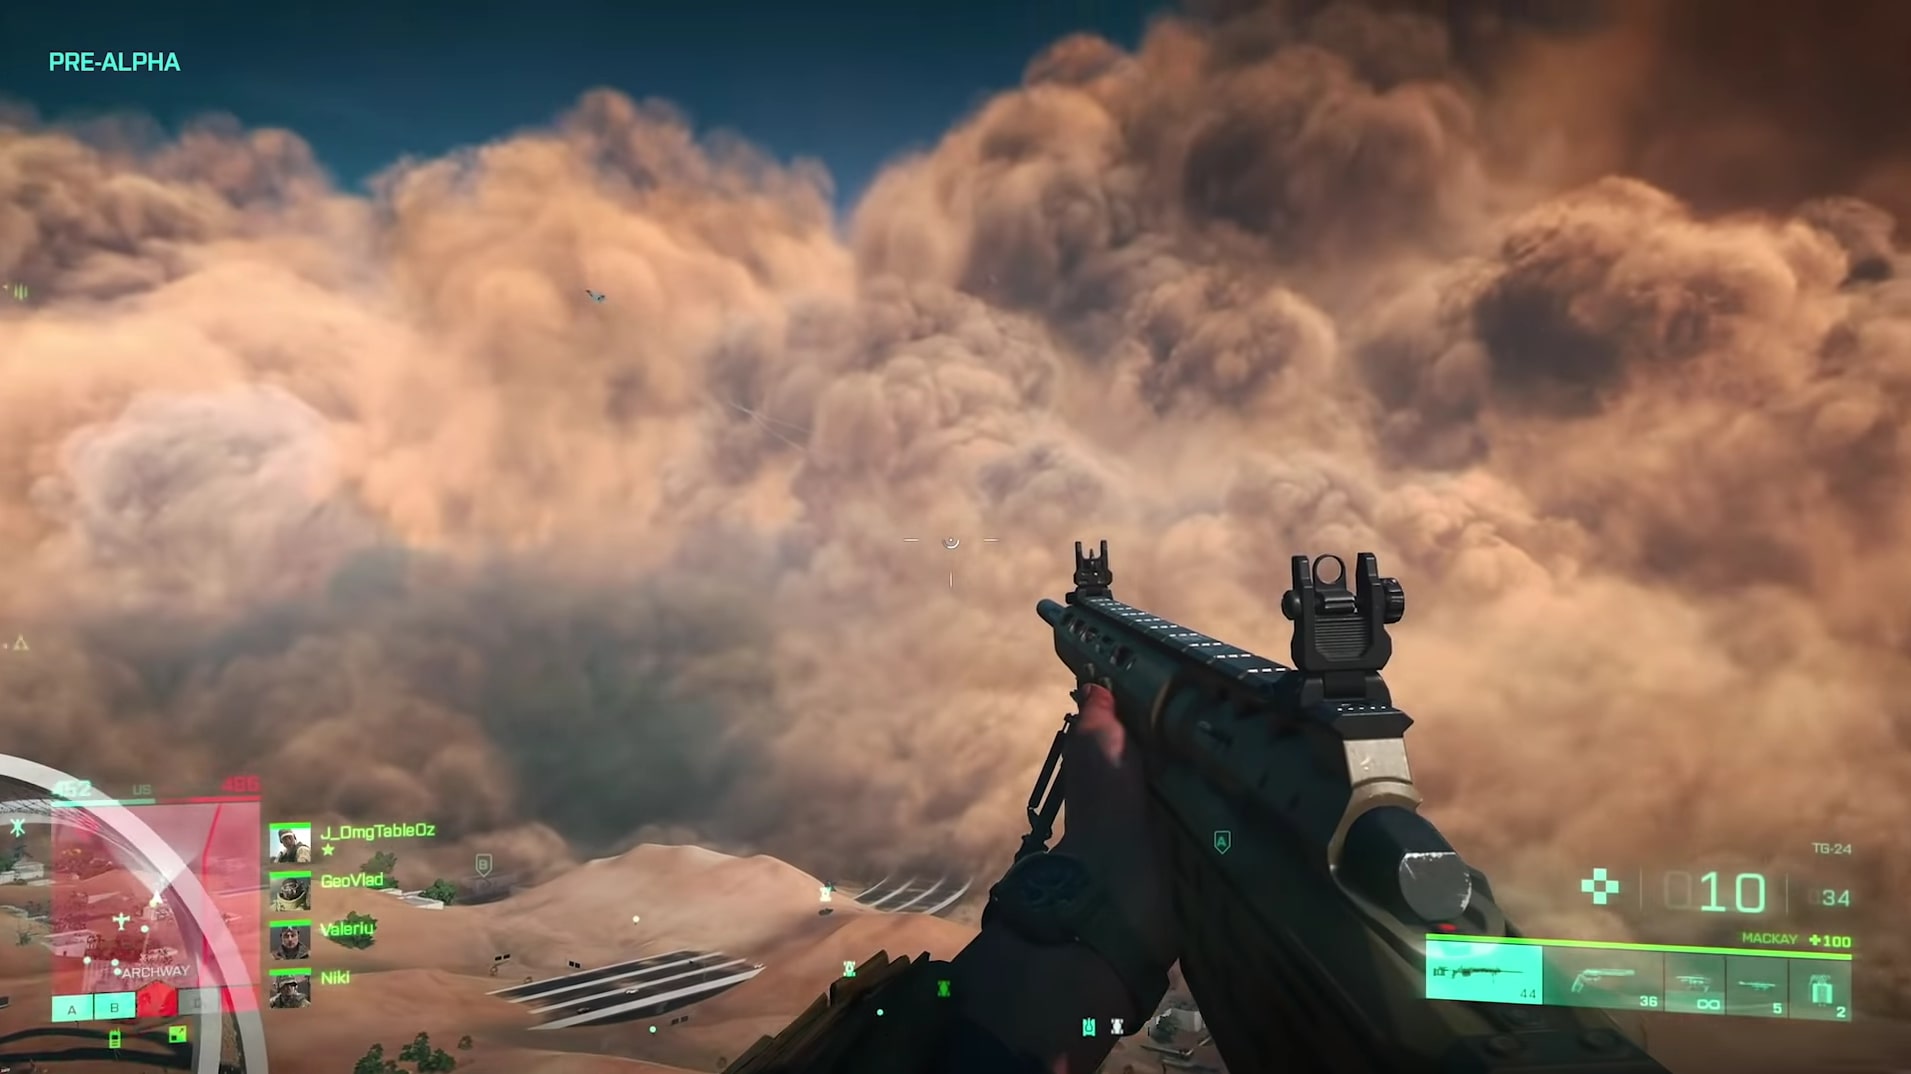 Joy for gamers, ahead of E3 2021, first Battlefield 2042 gameplay footage  revealed